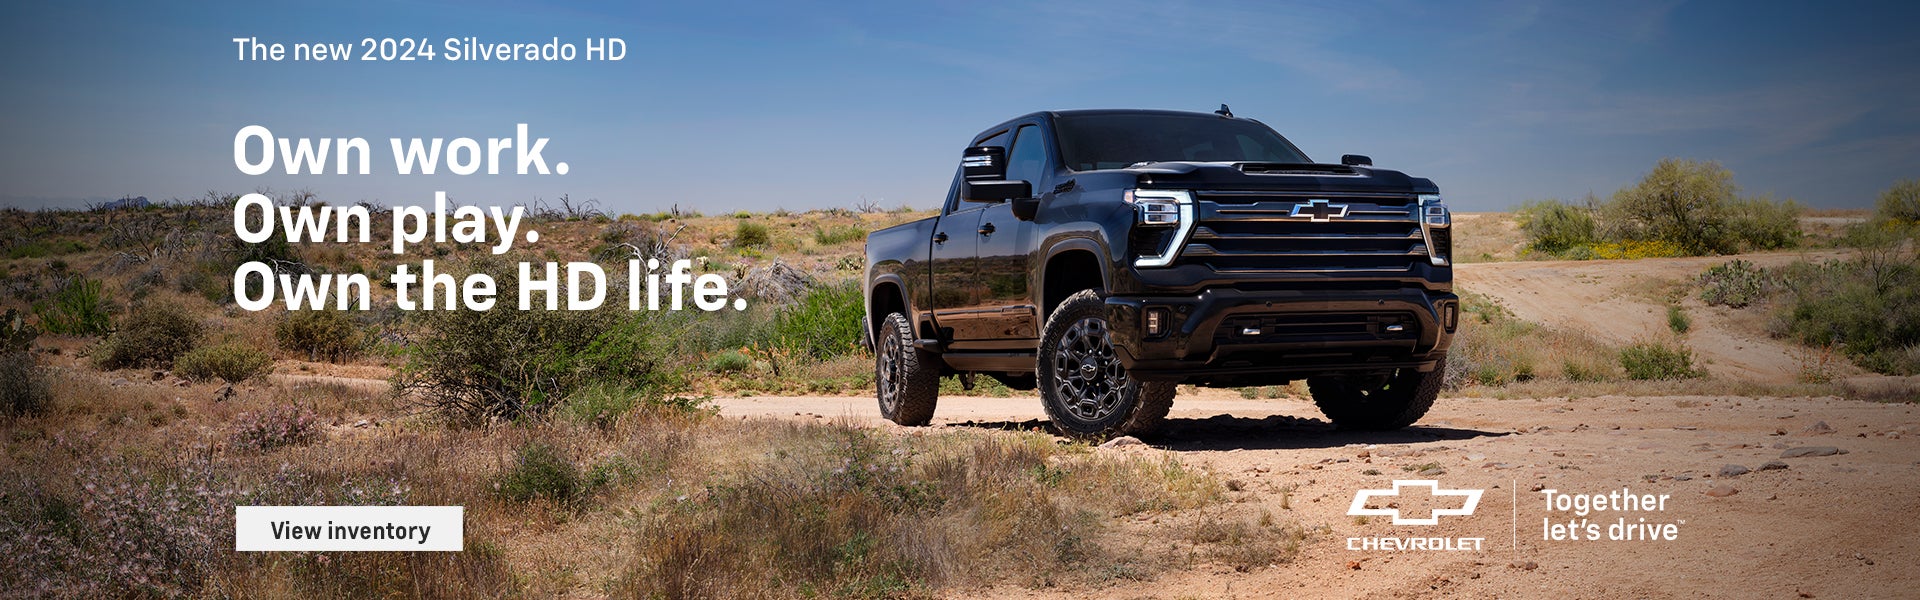 The new 2024 Chevy Silverado HD. Own work. Own play. Own the HD life.